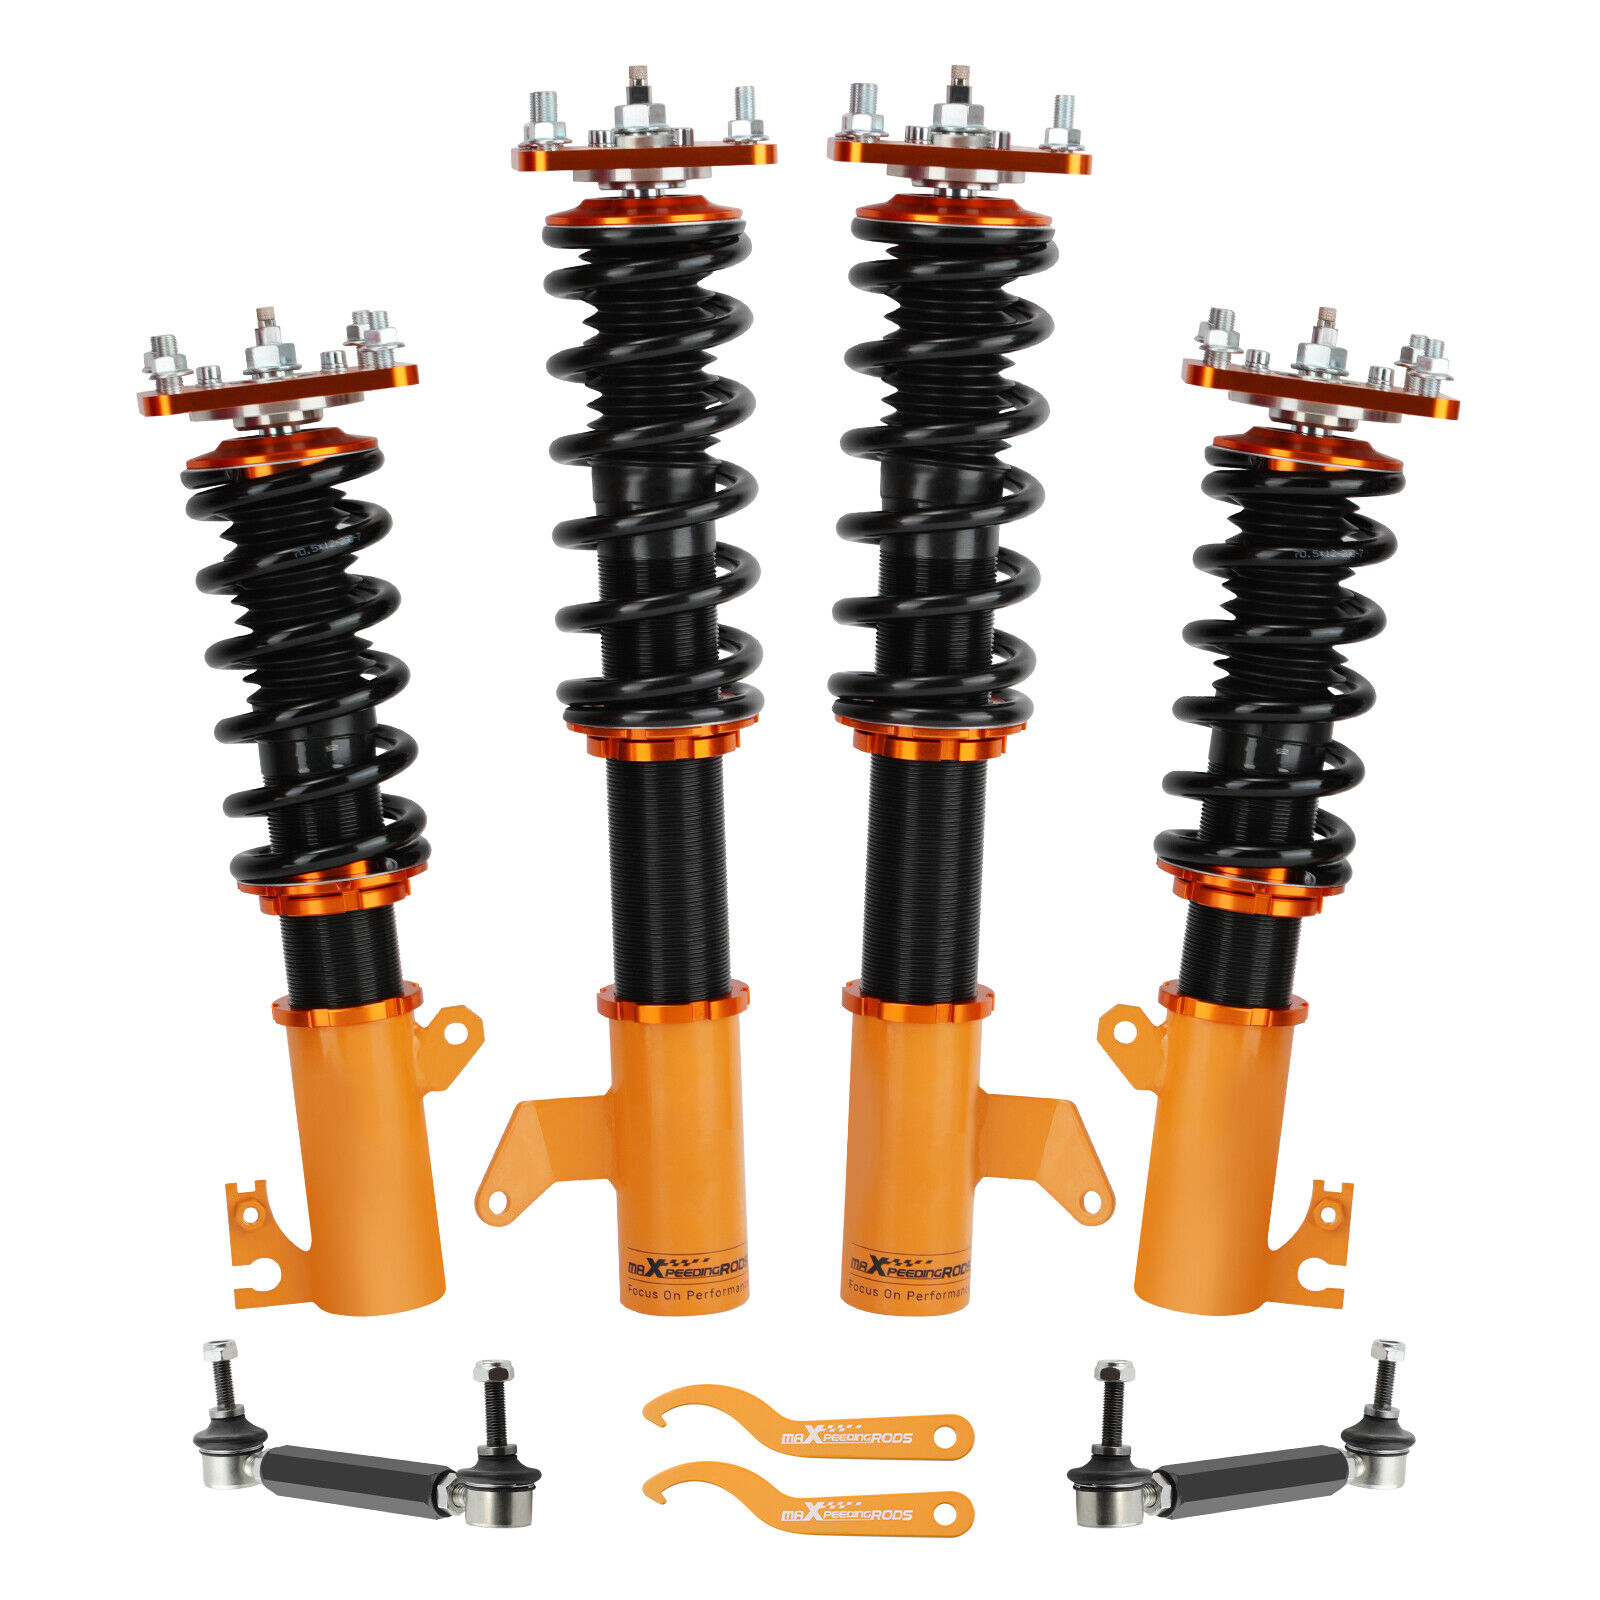 24 Way Damper Coilovers Suspension Lowering Kits for Mazda Protege 323 1999-2003